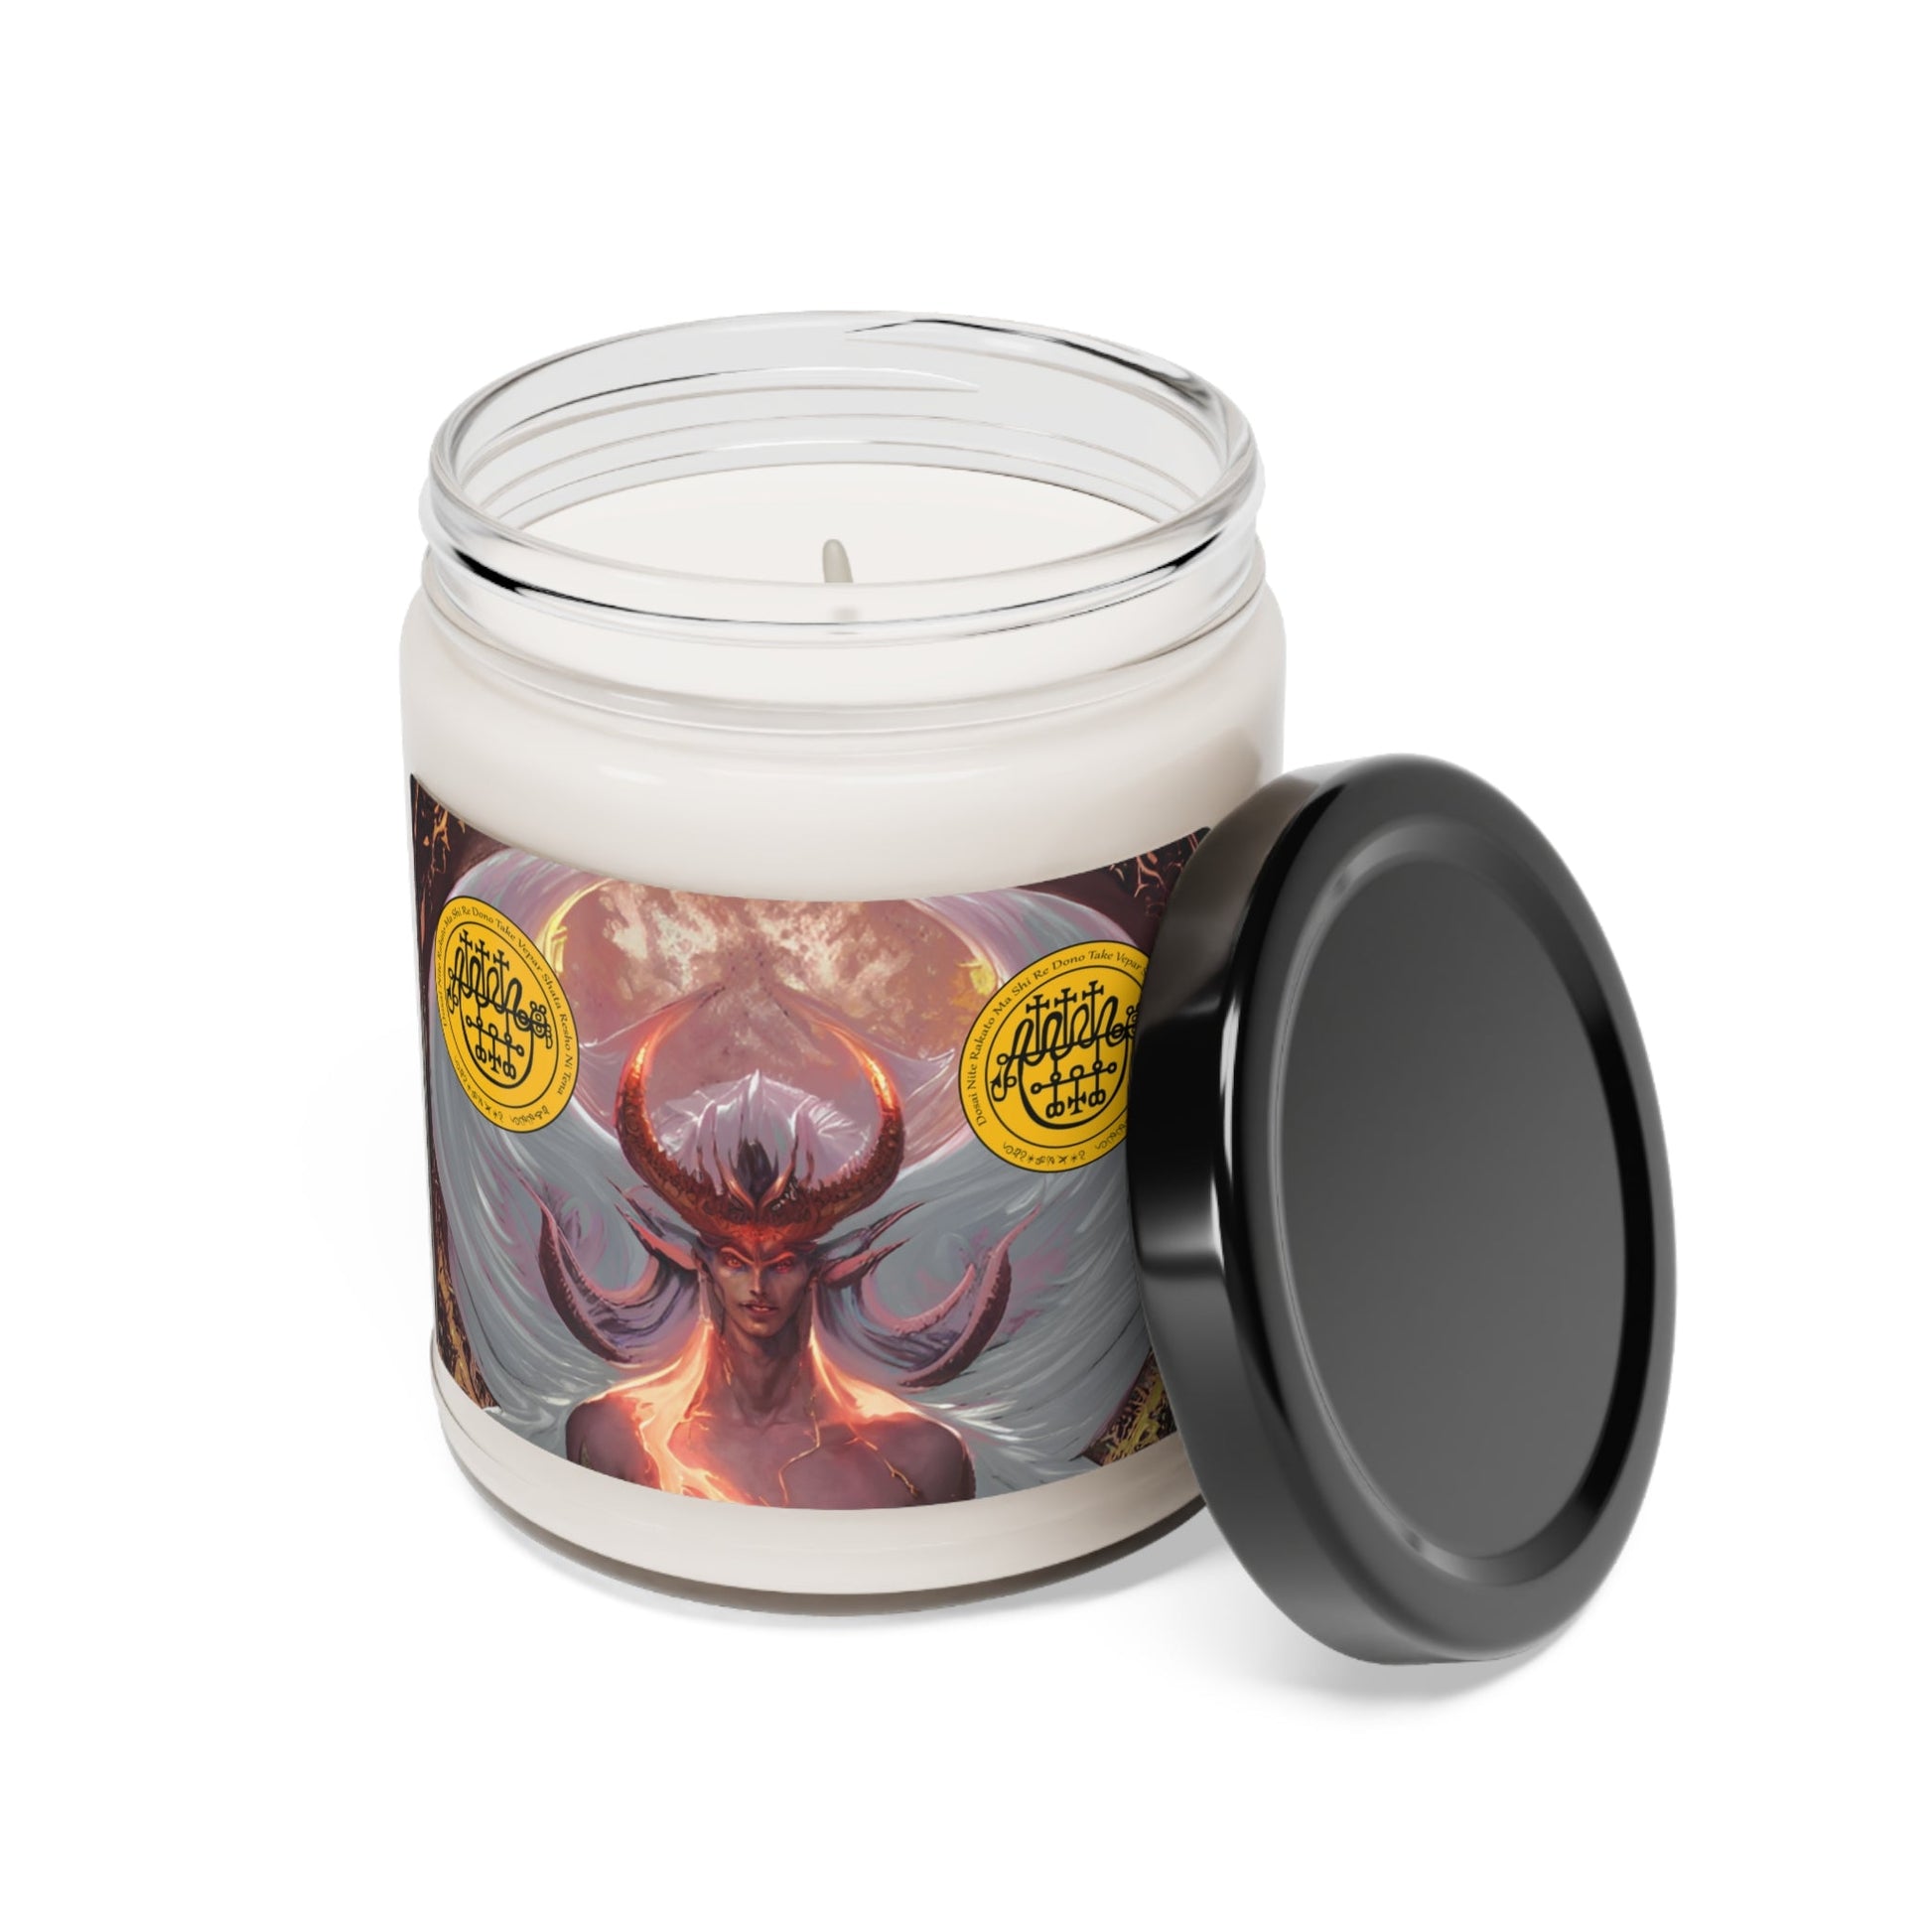 Demon-Vepar-Altar-Scented-Soy-Candle-for-offerings-rituals-initiations-o-praying-and-medtation-12